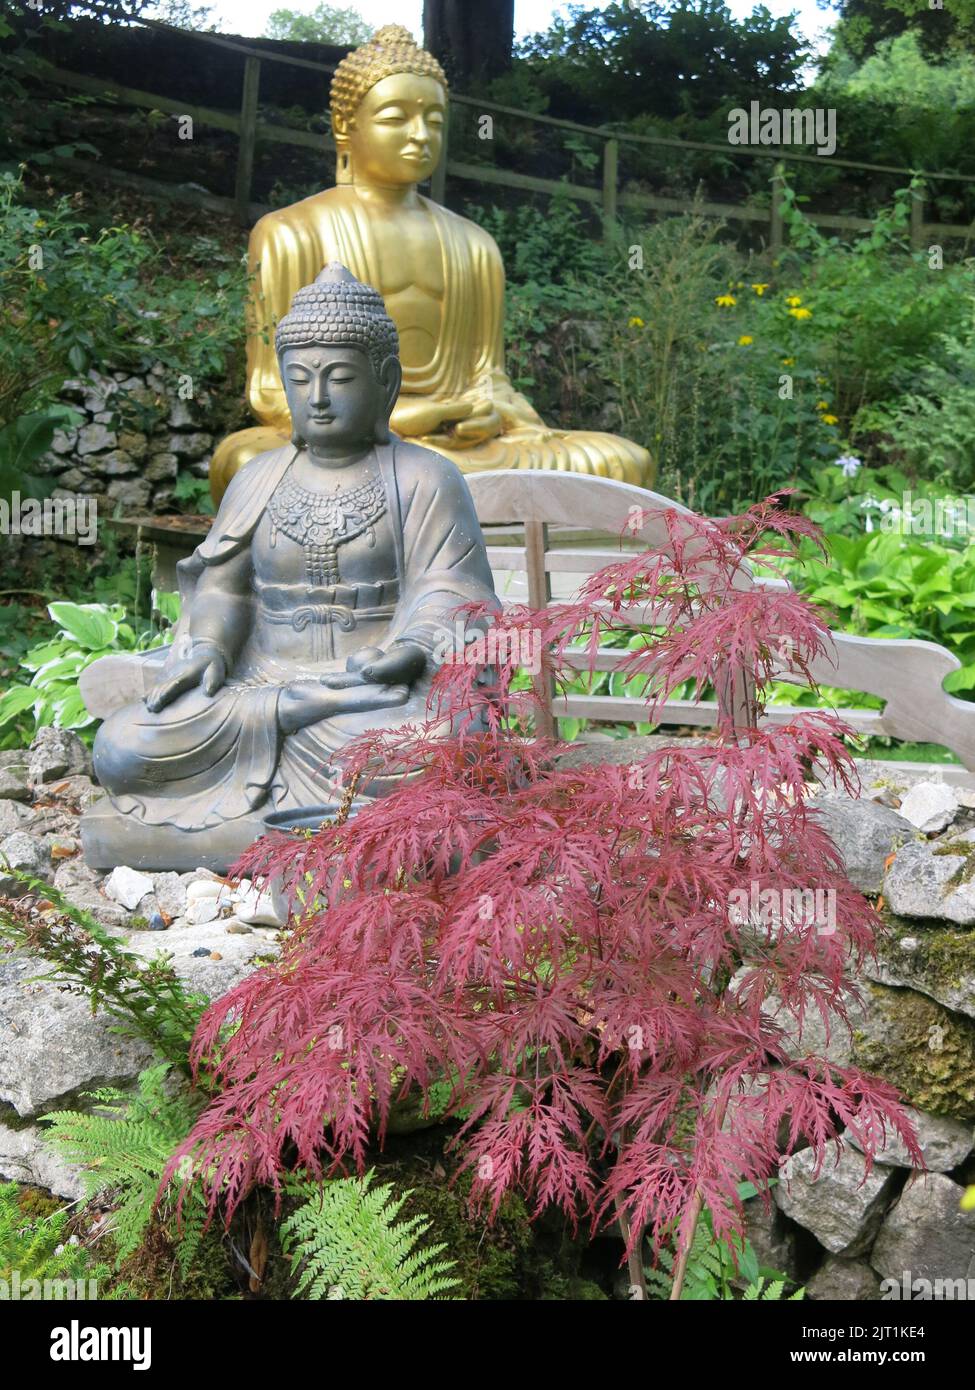 With acers and Buddhist statues, Cascades Garden in Derbyshire draws its inspiration from traditional Japanese gardens and the philosophy of Buddhism. Stock Photo